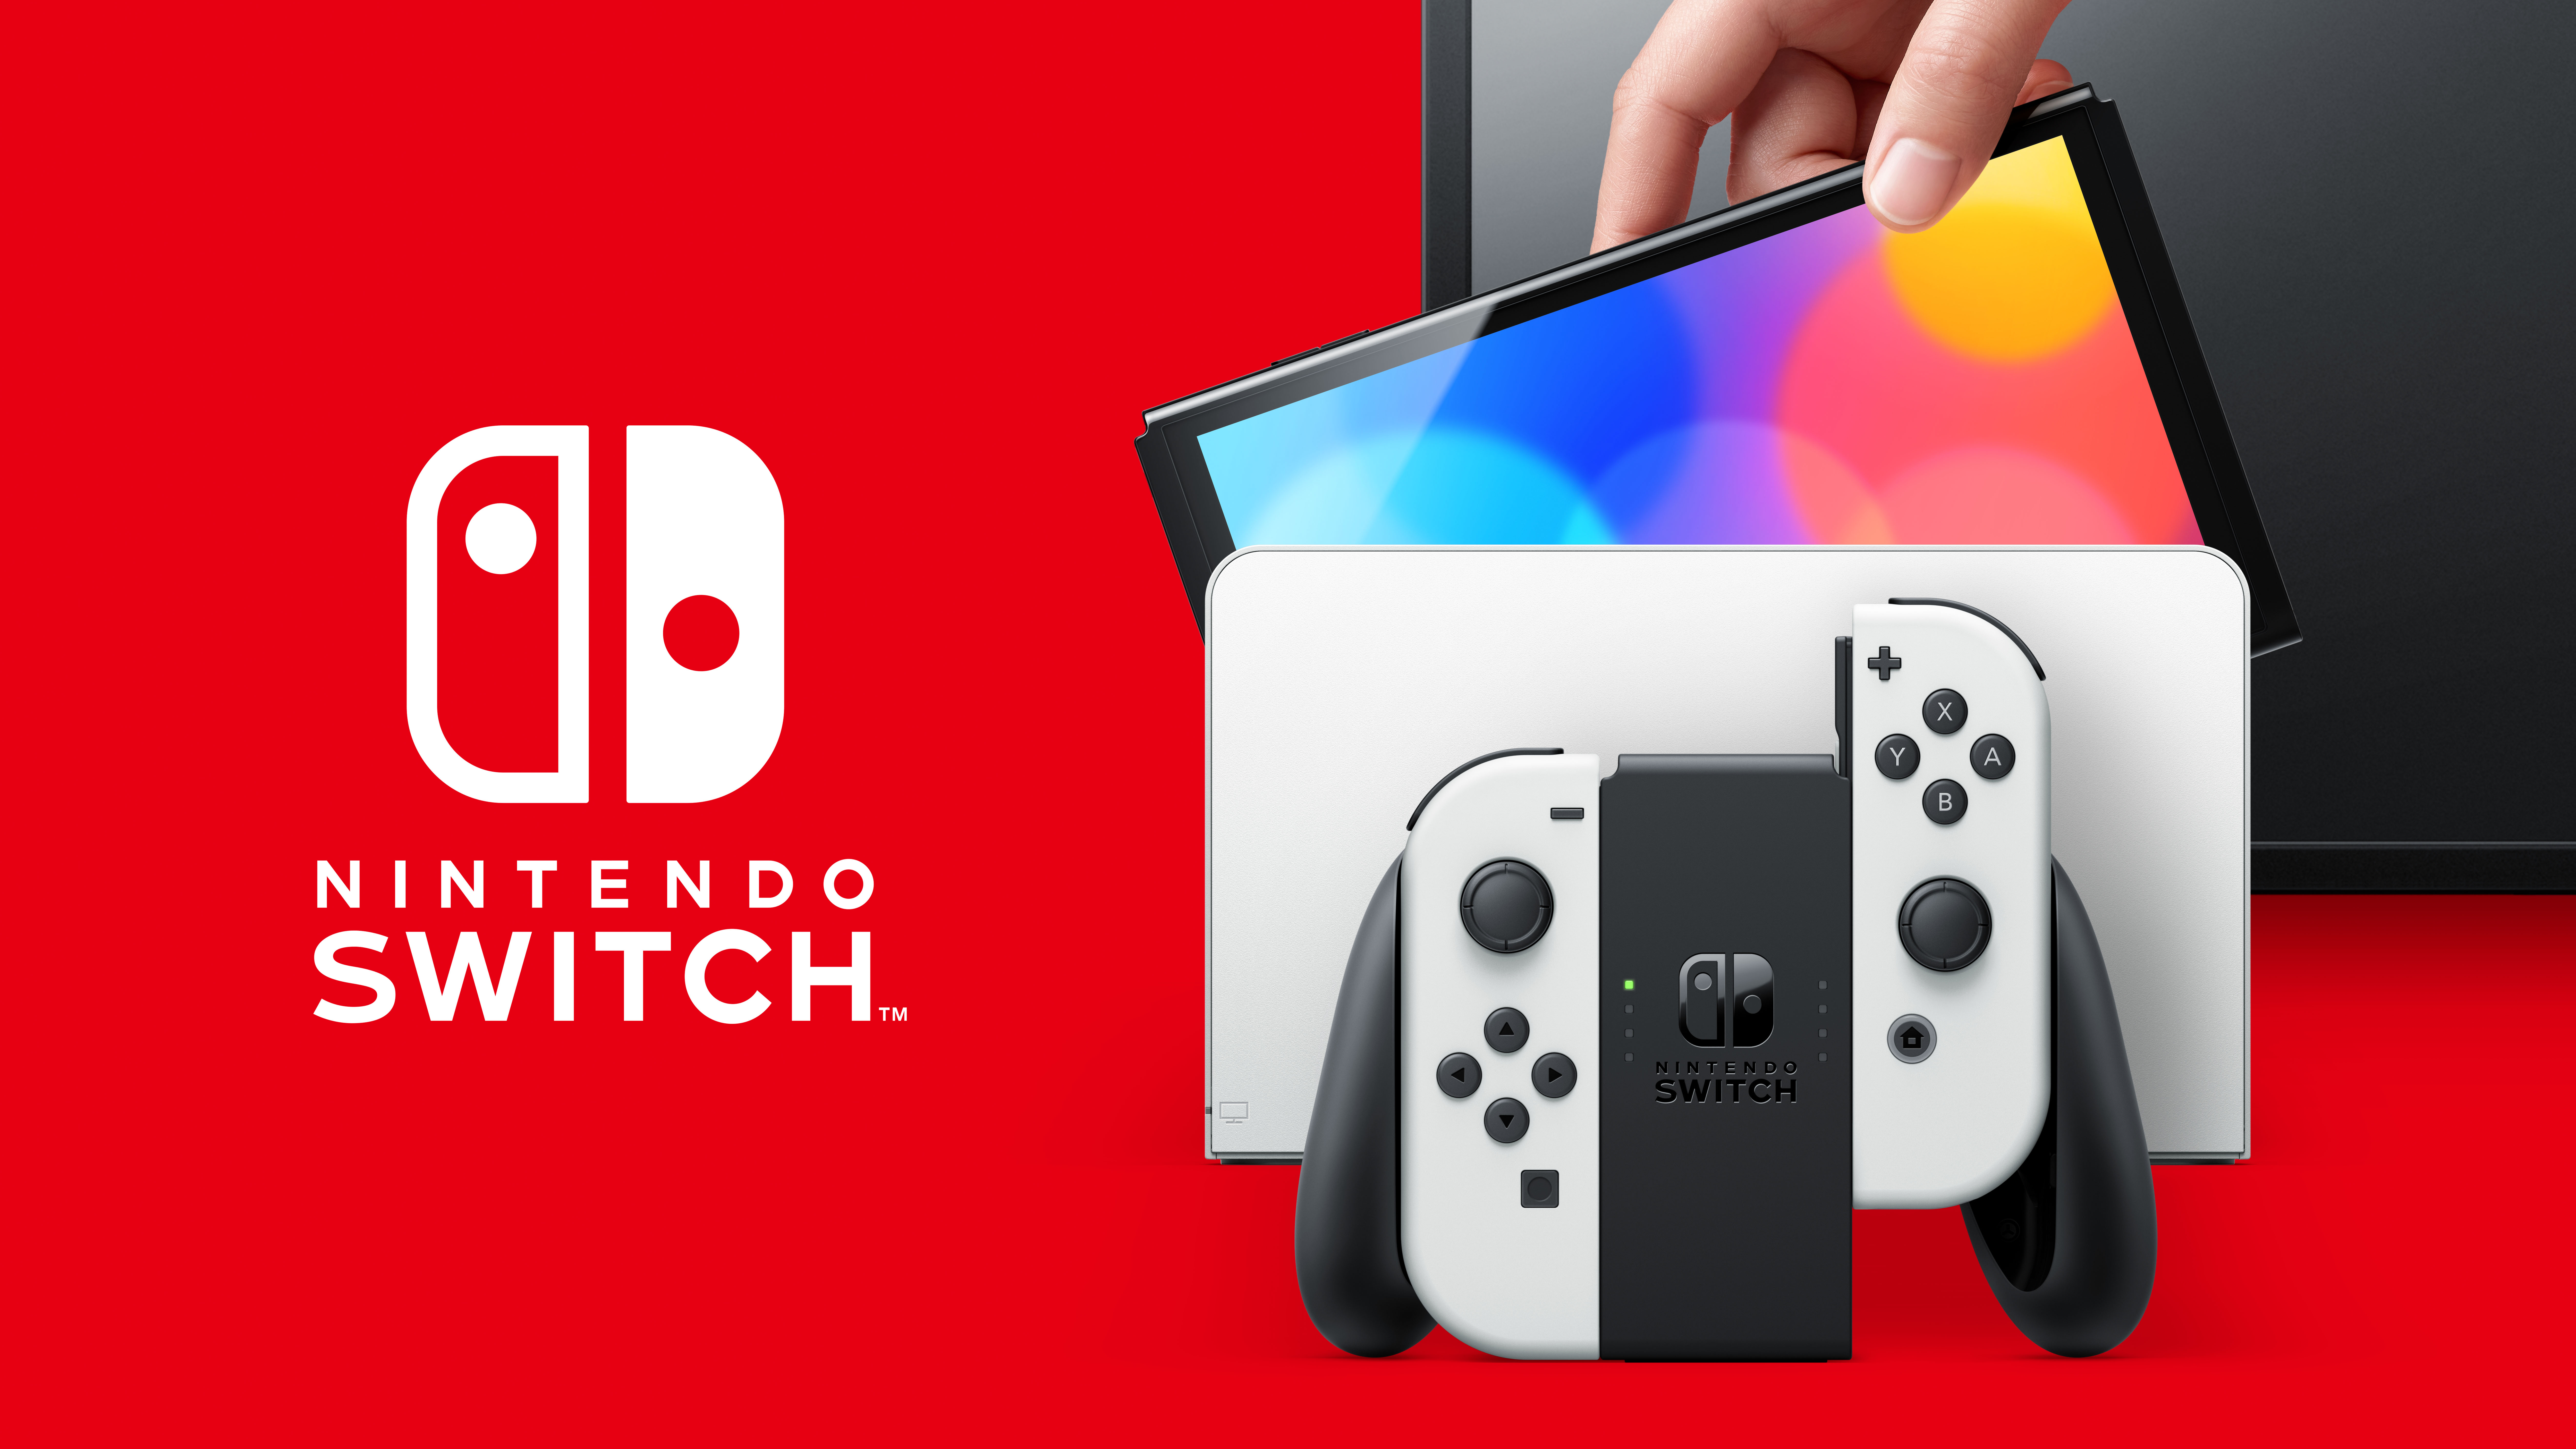 Stick with the current Switch' if you don't care about the OLED